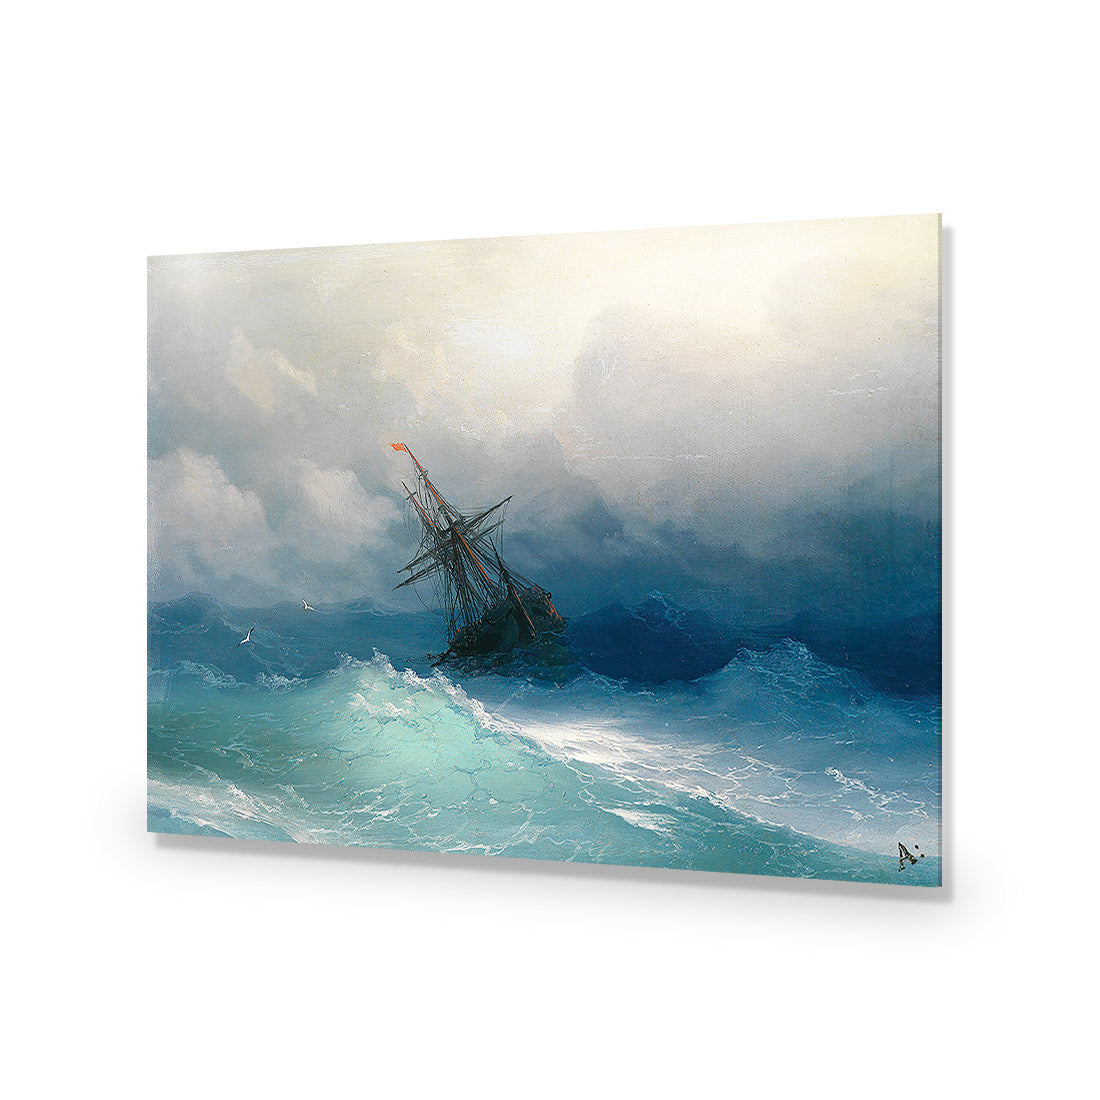 Caught In A Storm - Ivan Aivazovsky Acrylic Glass Art-Acrylic-Wall Art Design-Without Border-Acrylic - No Frame-45x30cm-Wall Art Designs